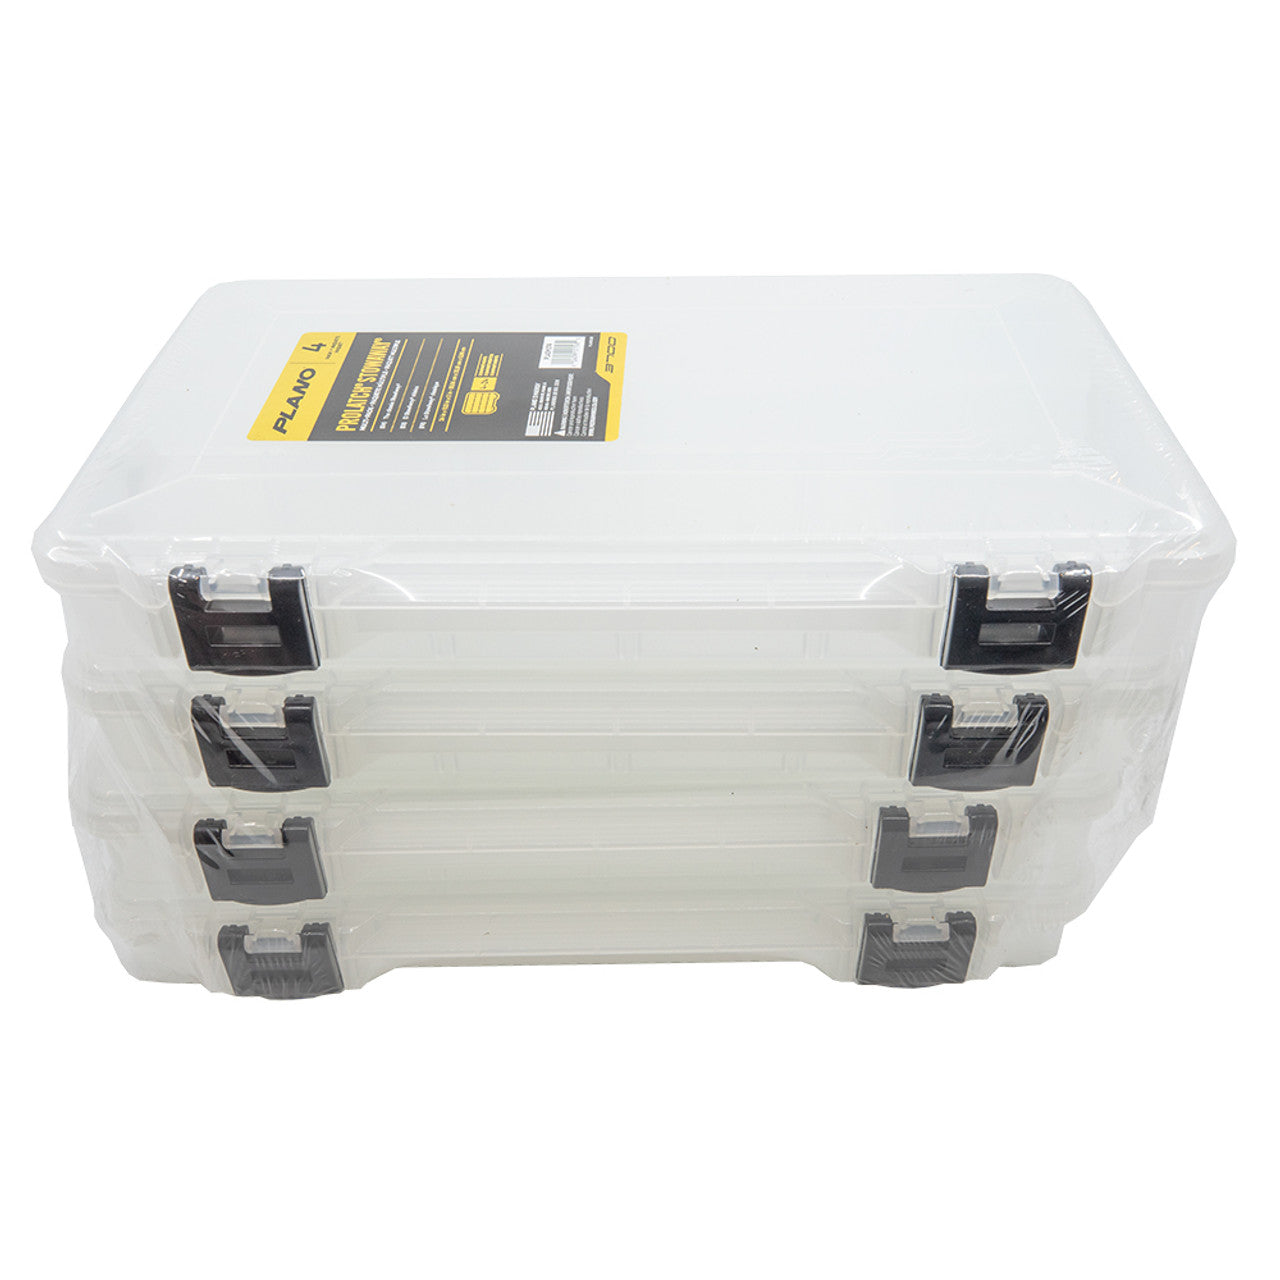 Plano Tackle Boxes - Pure Fishing